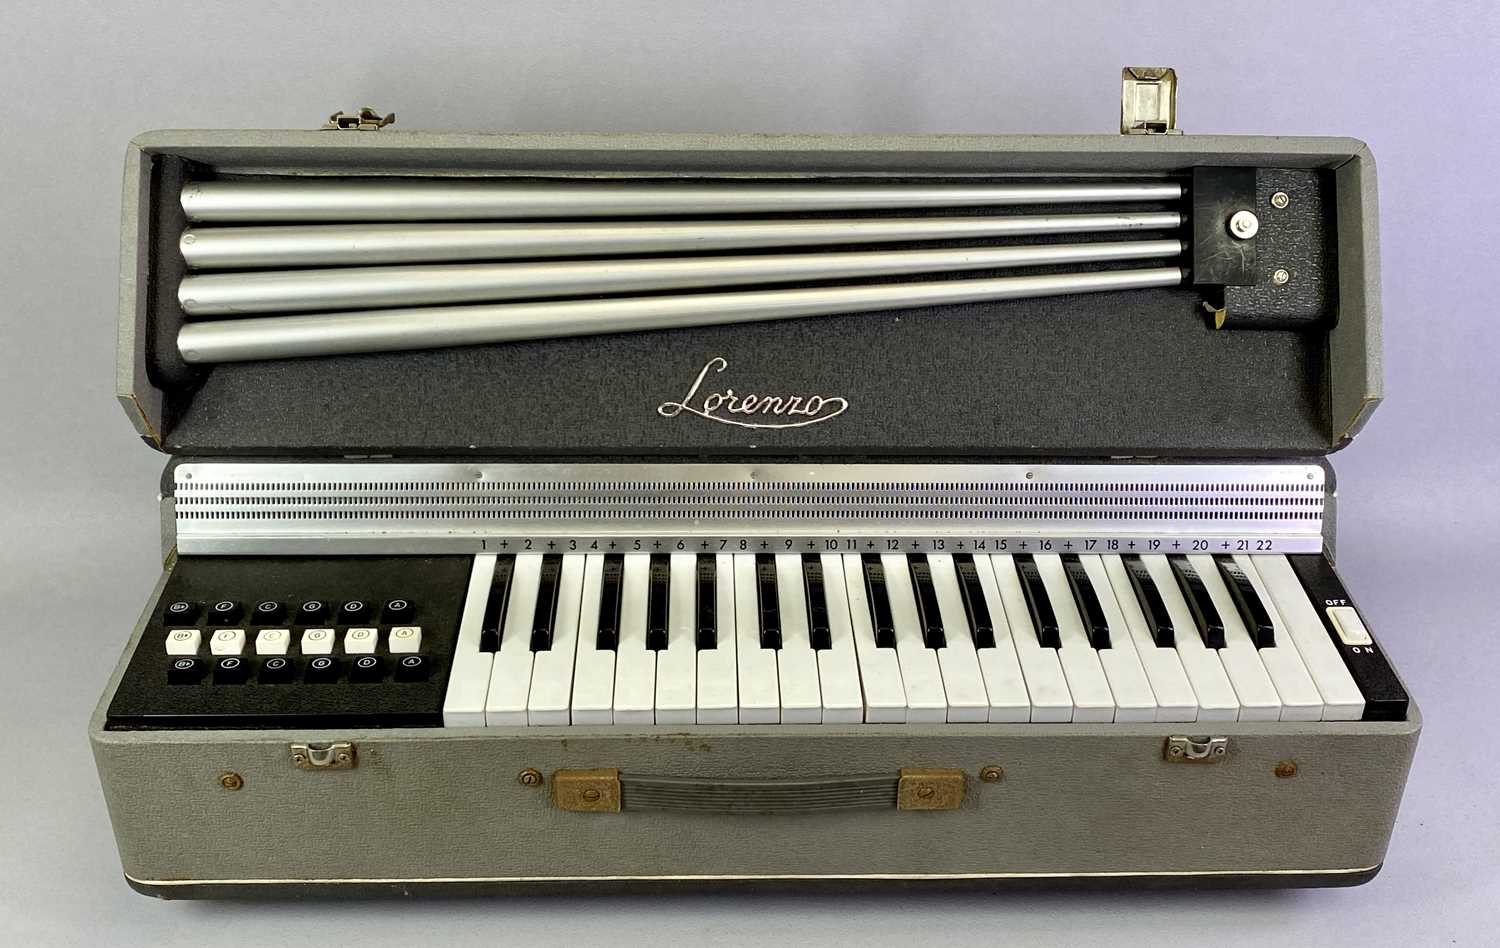 LORENZO VINTAGE PORTABLE ORGAN, Frister & Rossmann electric sewing machine in case with foot - Image 3 of 5